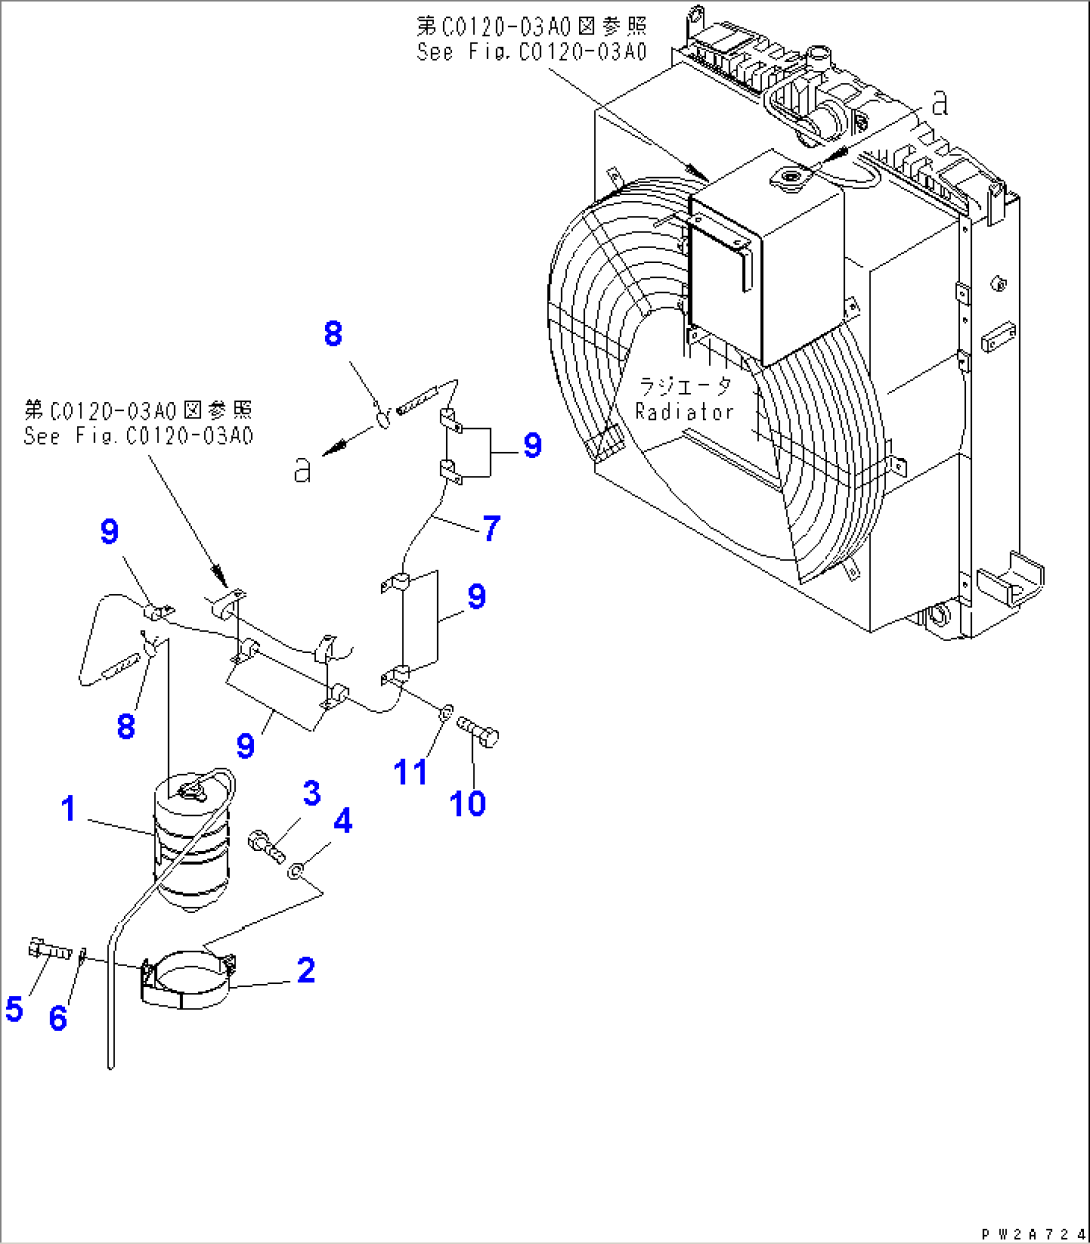 RADIATOR (RESERVE TANK AND PIPING)(#50001-51000)